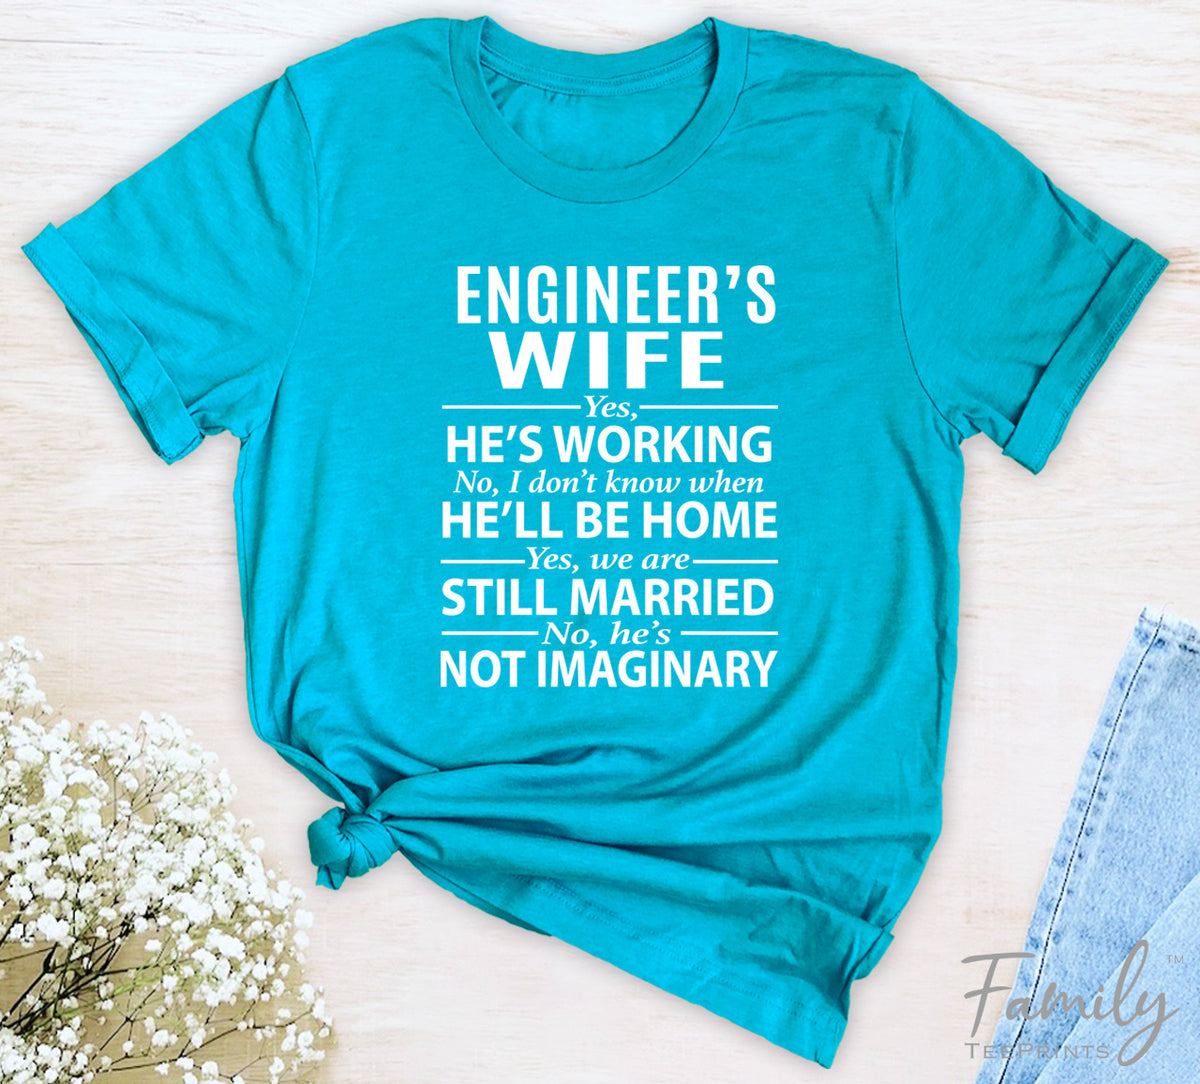 Engineer's Wife Yes, He's Working - Unisex T-shirt - Engineer's Wife Shirt - Gift for Engineer's Wife